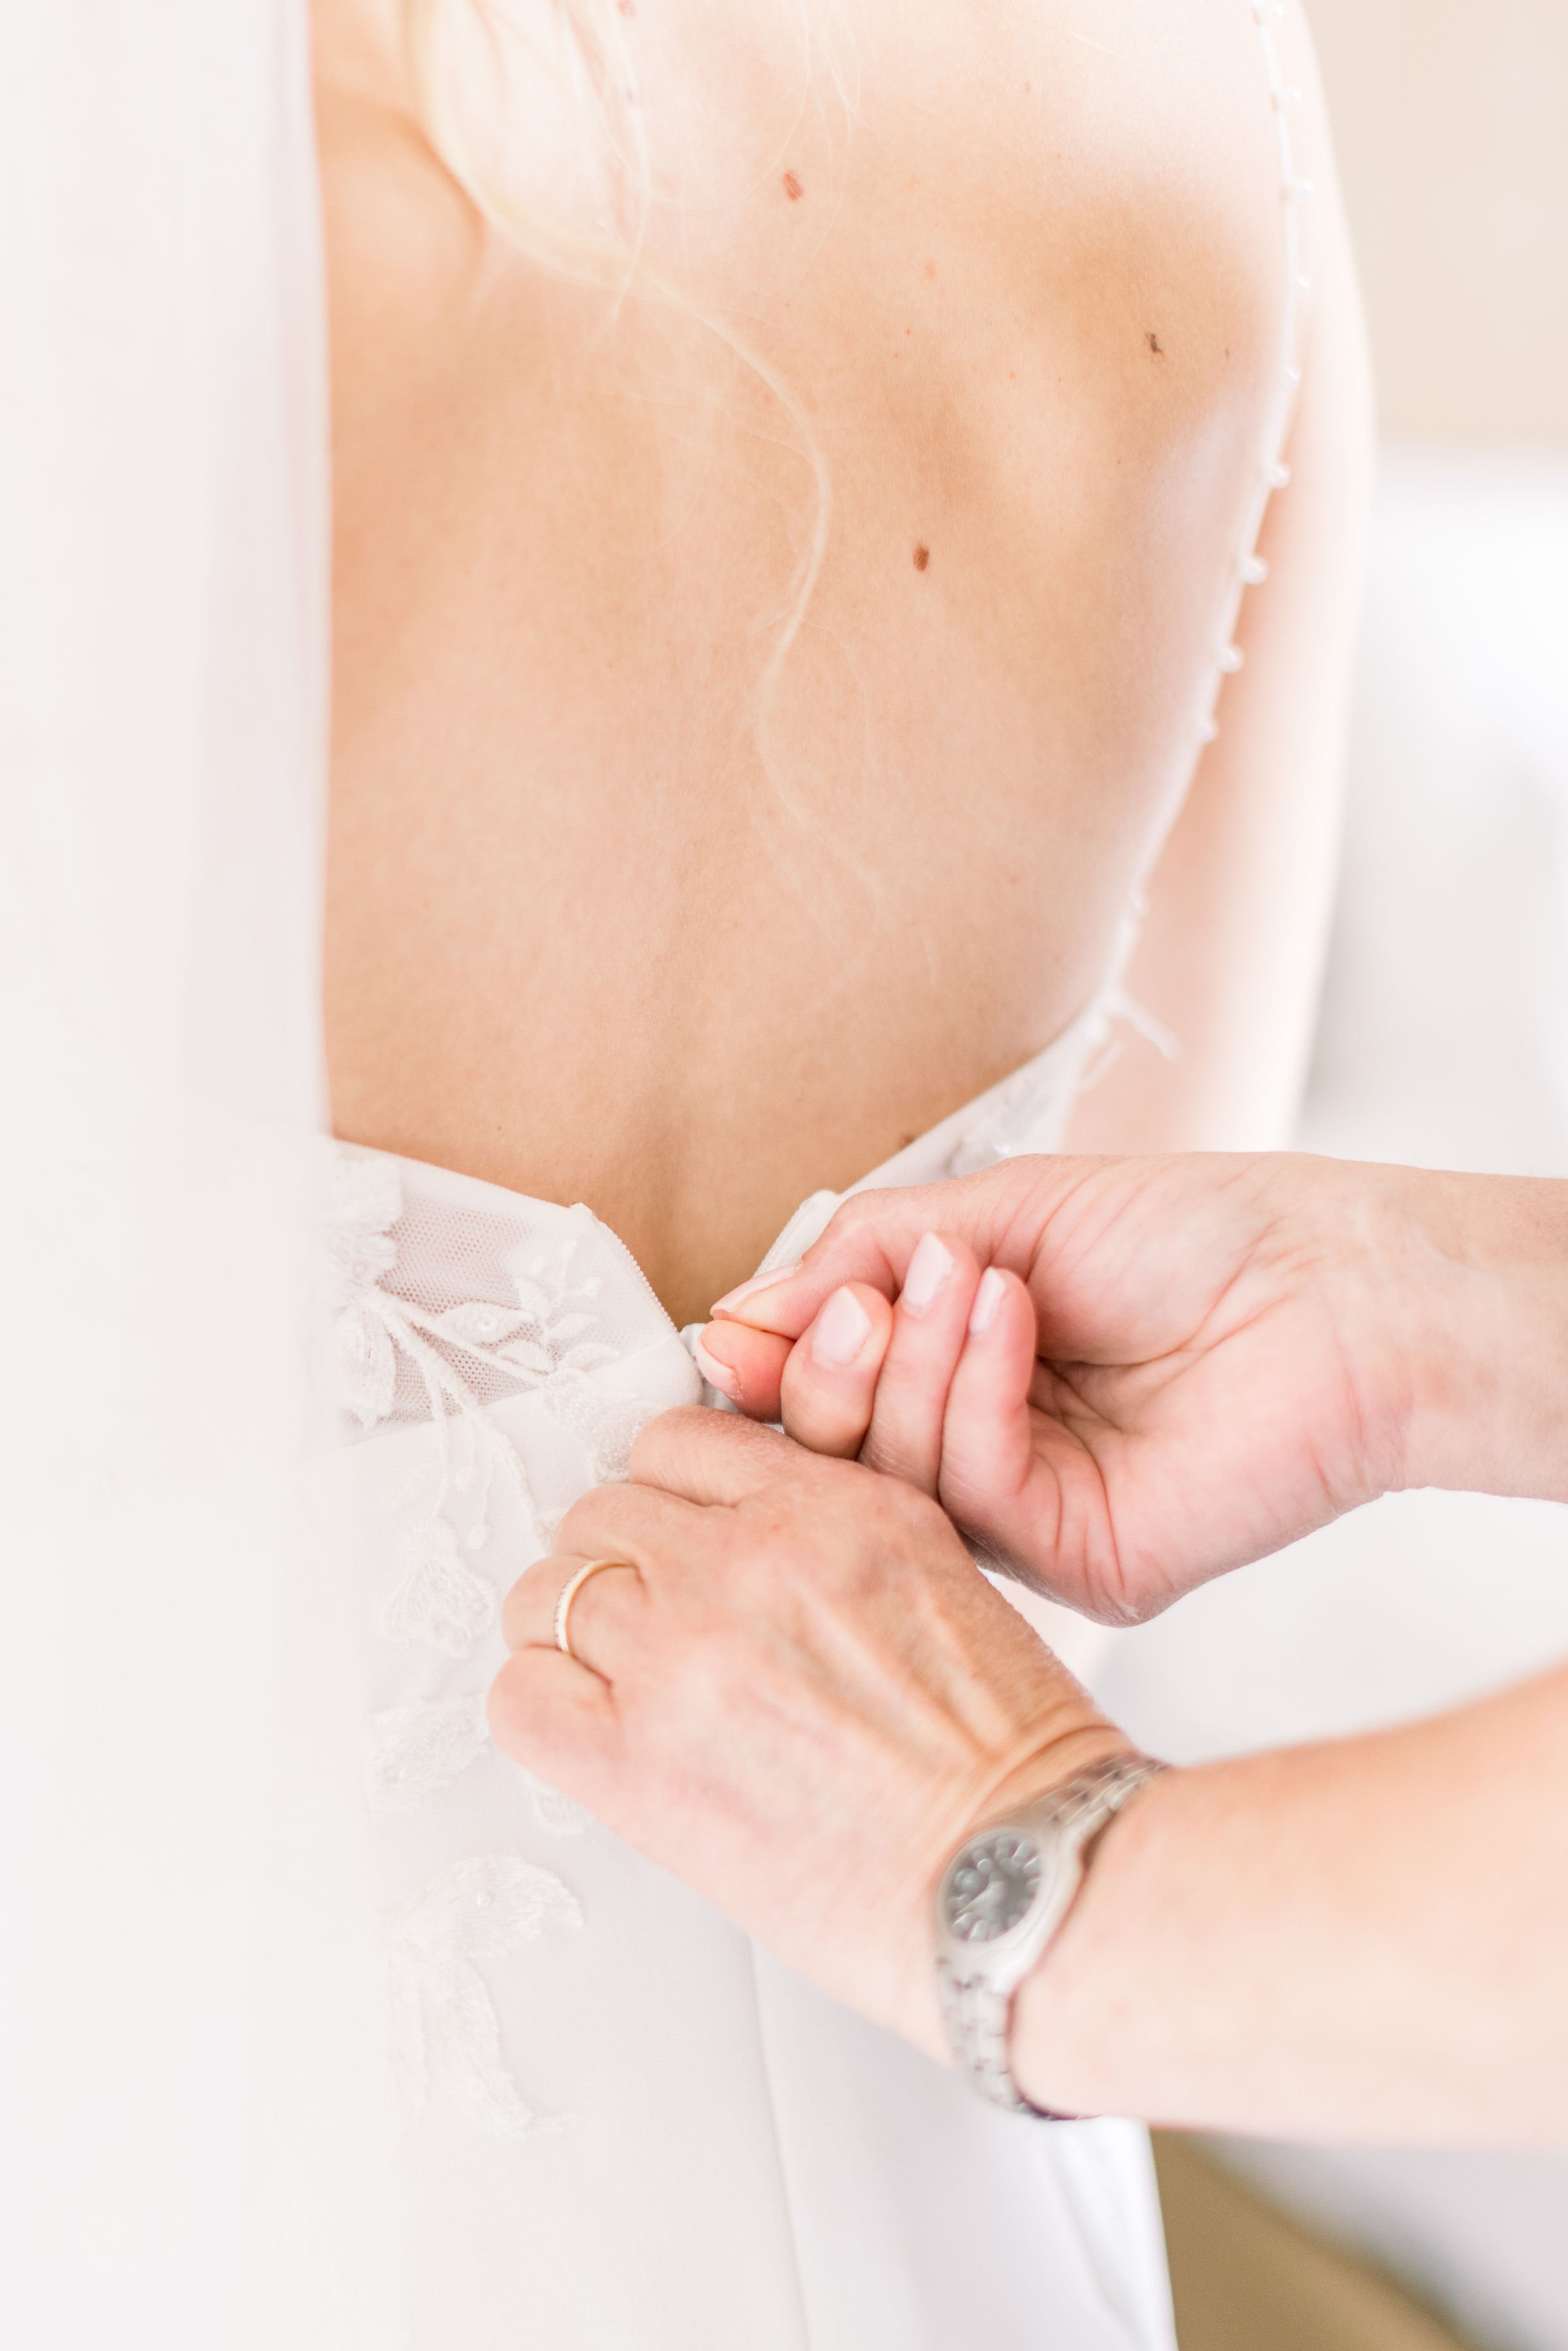  Picture of a bride getting her wedding dress zipped up by Chelsea Mason Photography during an Alberta wedding. bridal pic #Albertaweddings #shesaidyes #Albertaweddingphotographers #SilvertipGolfCourse #ChelseaMasonPhotography #ChelseaMasonWeddings  